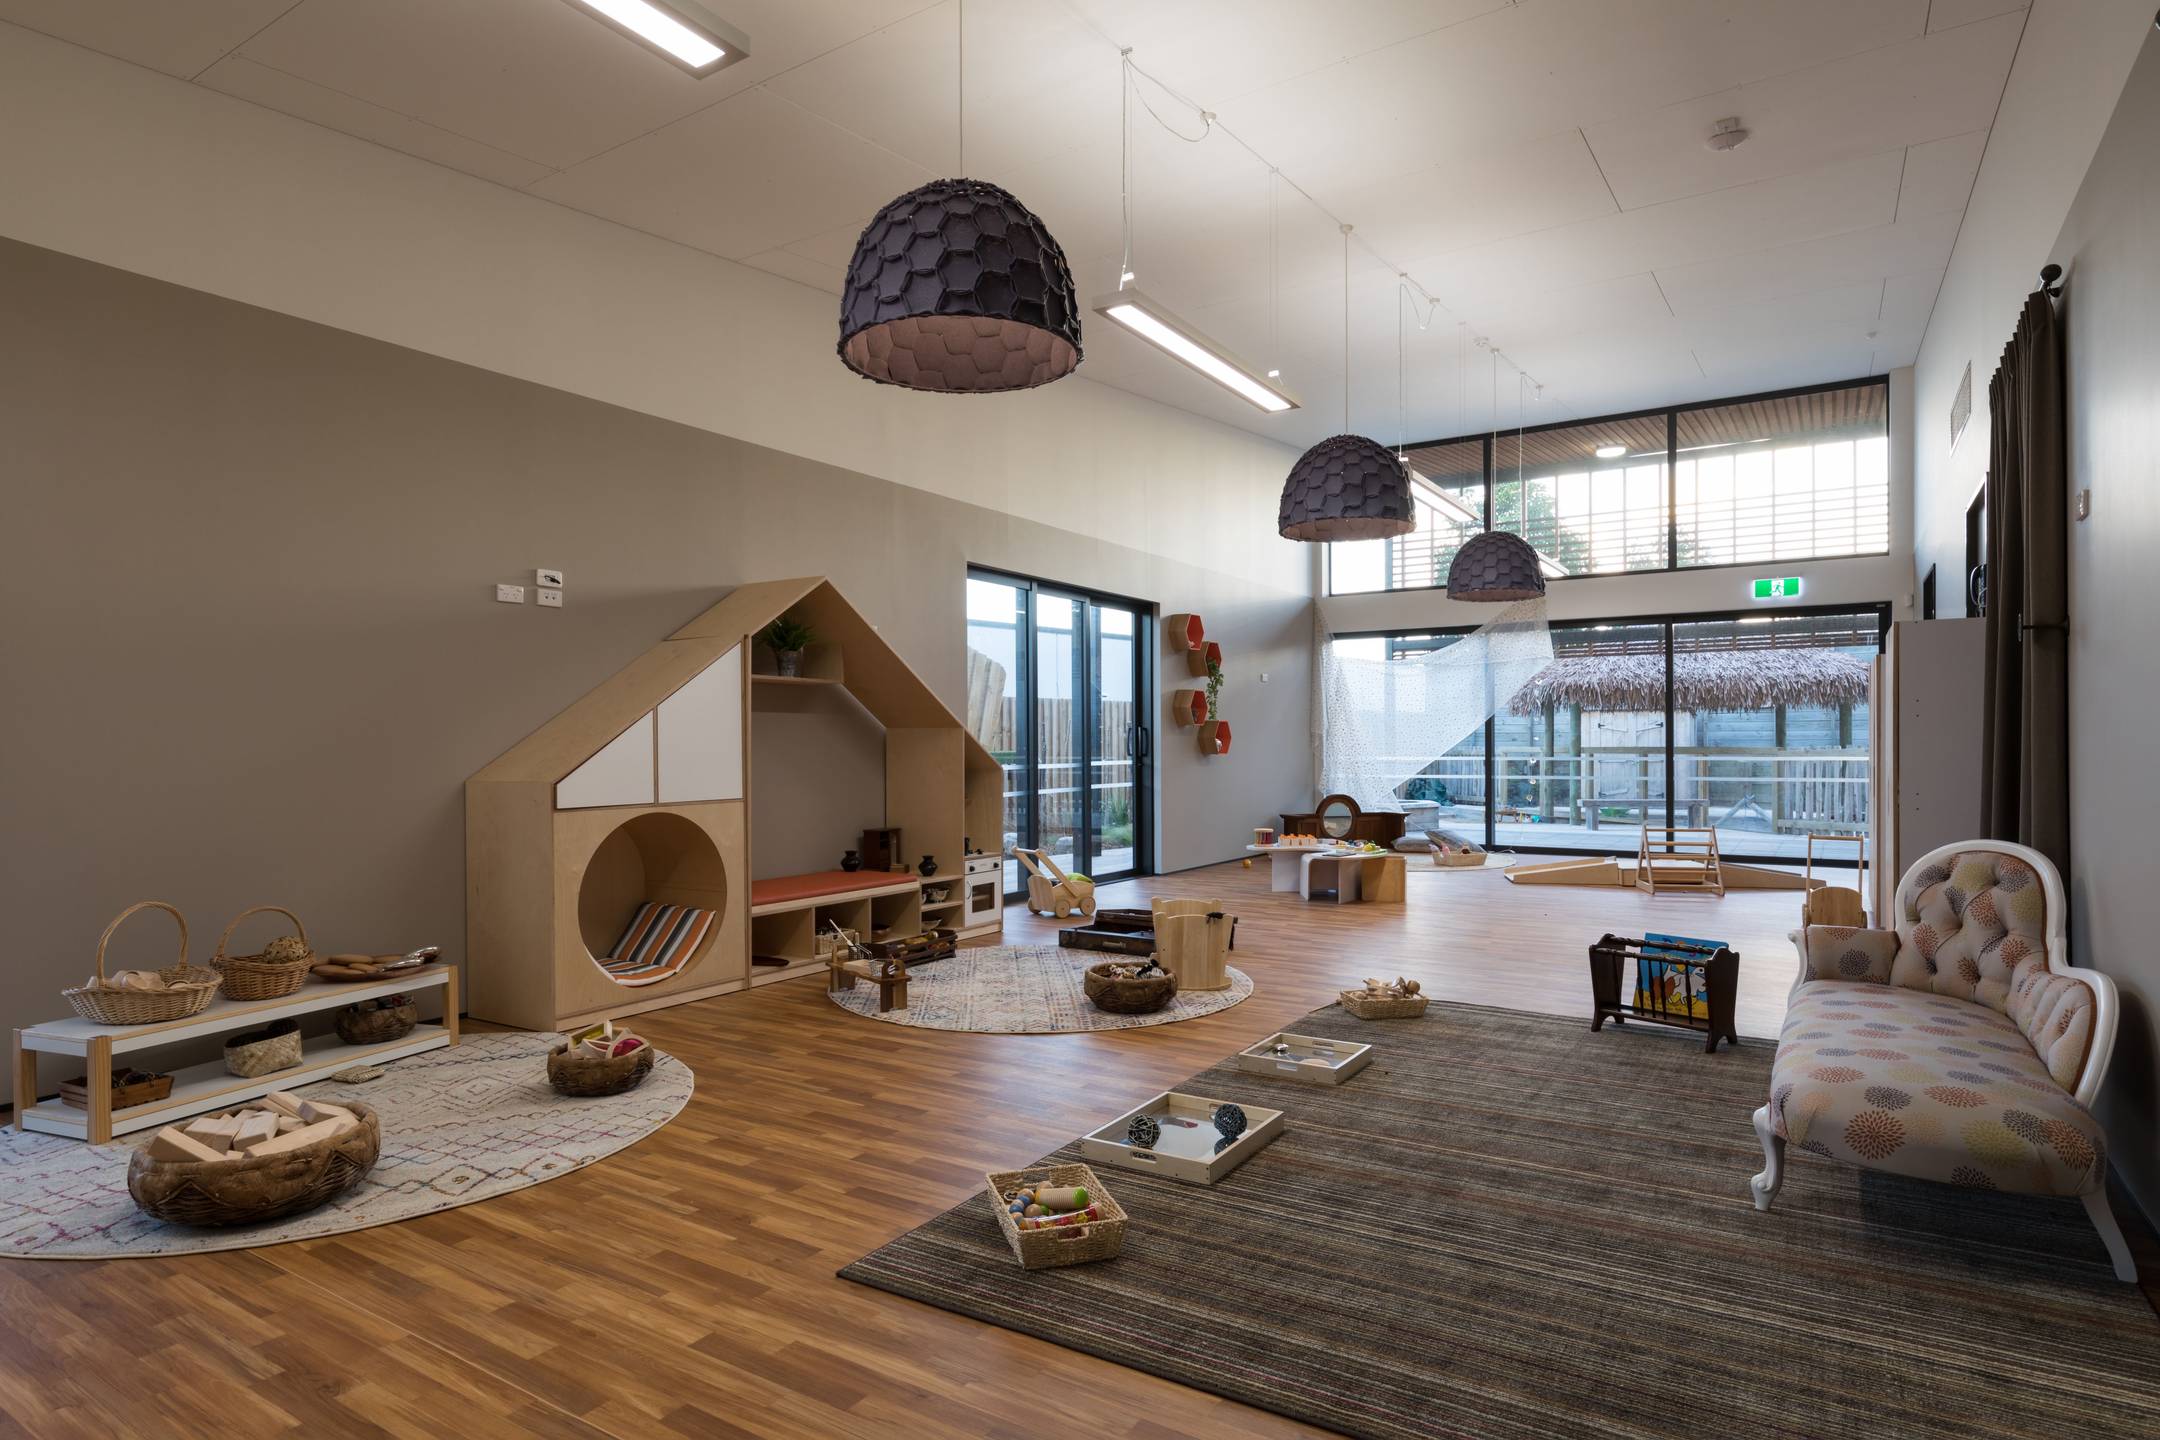 Oracle Childcare by Herbst Maxcey Metropolitan Architects